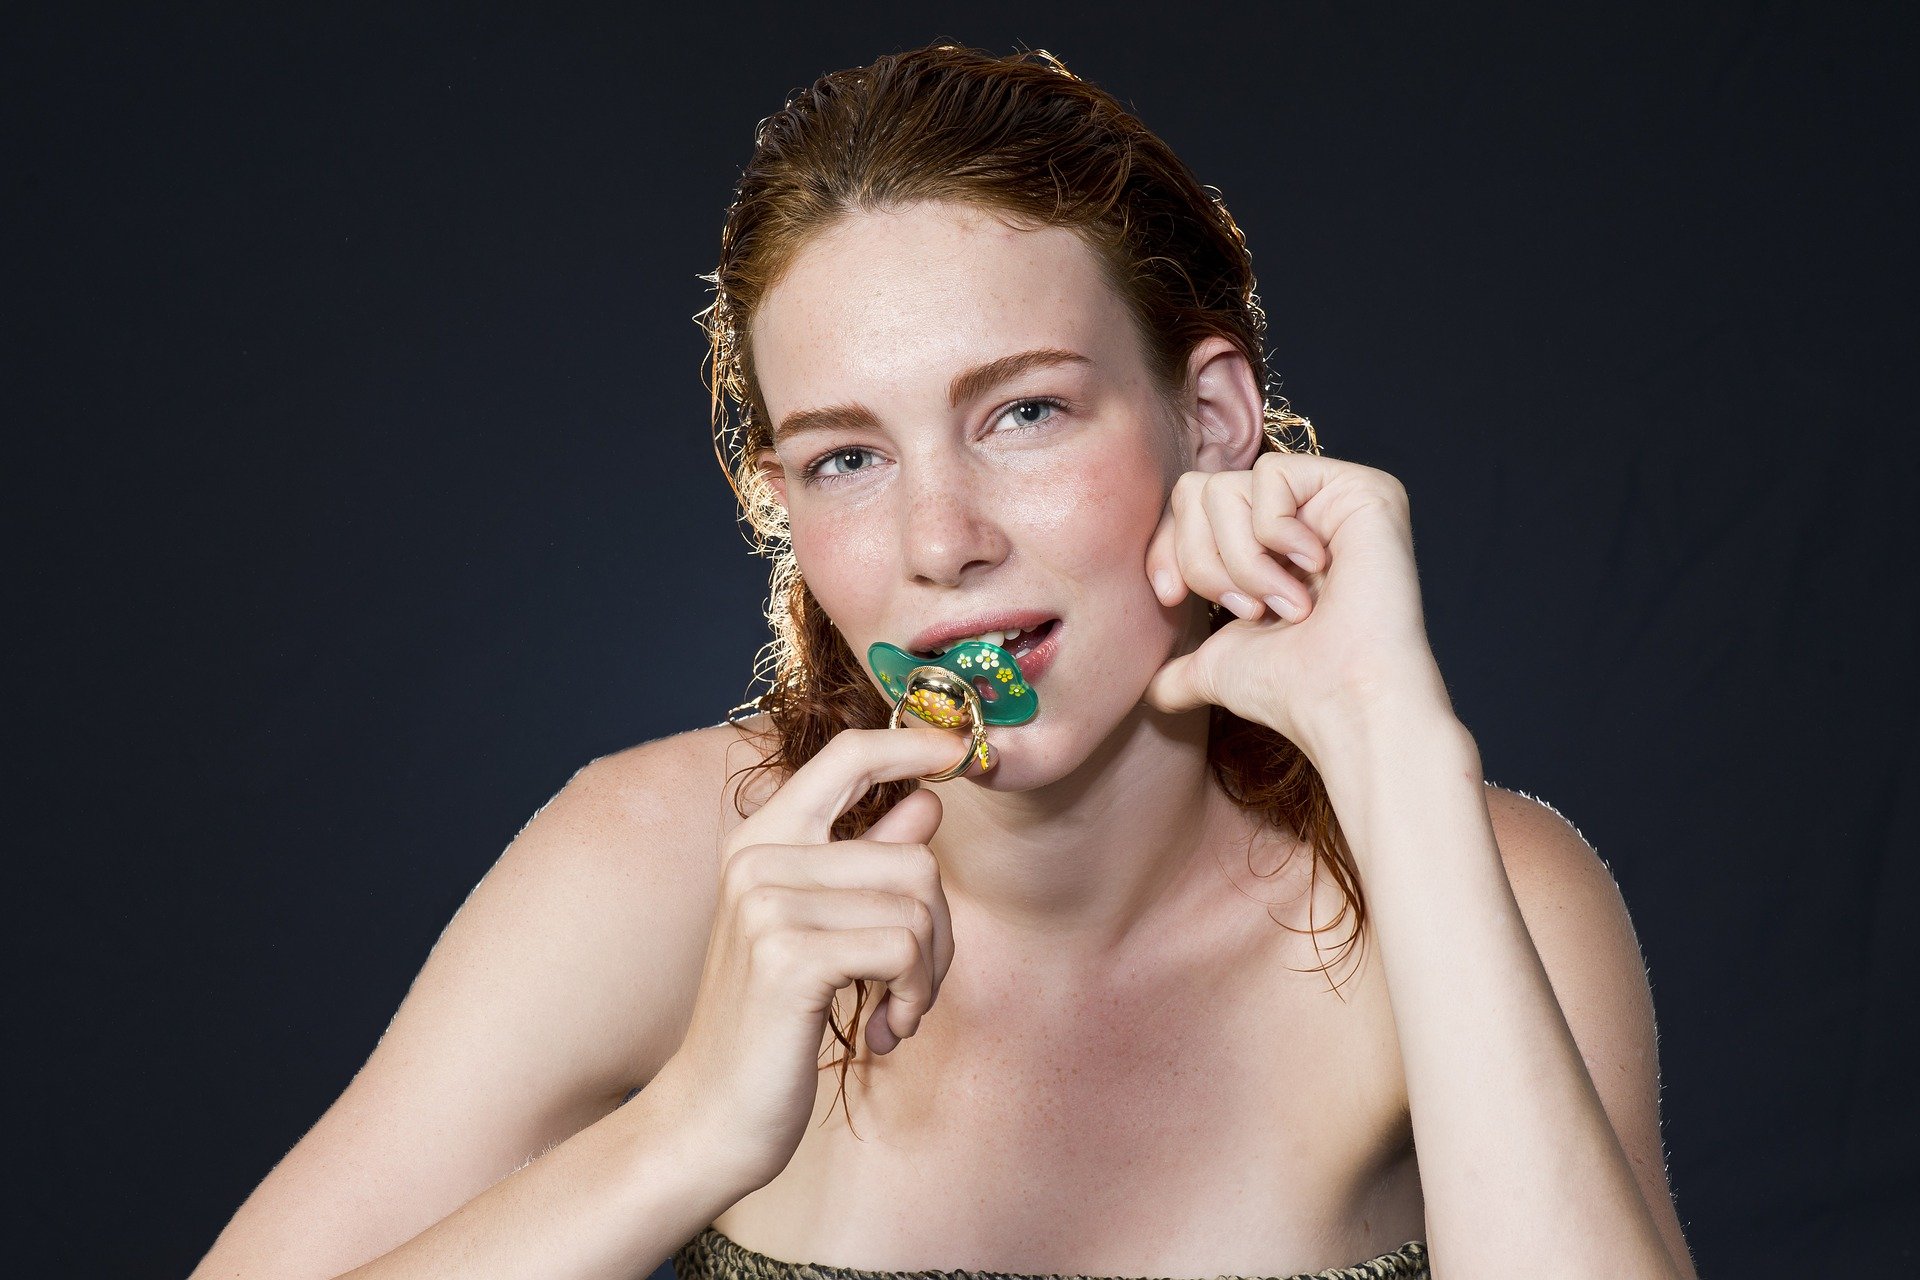 model with pacifier in mouth